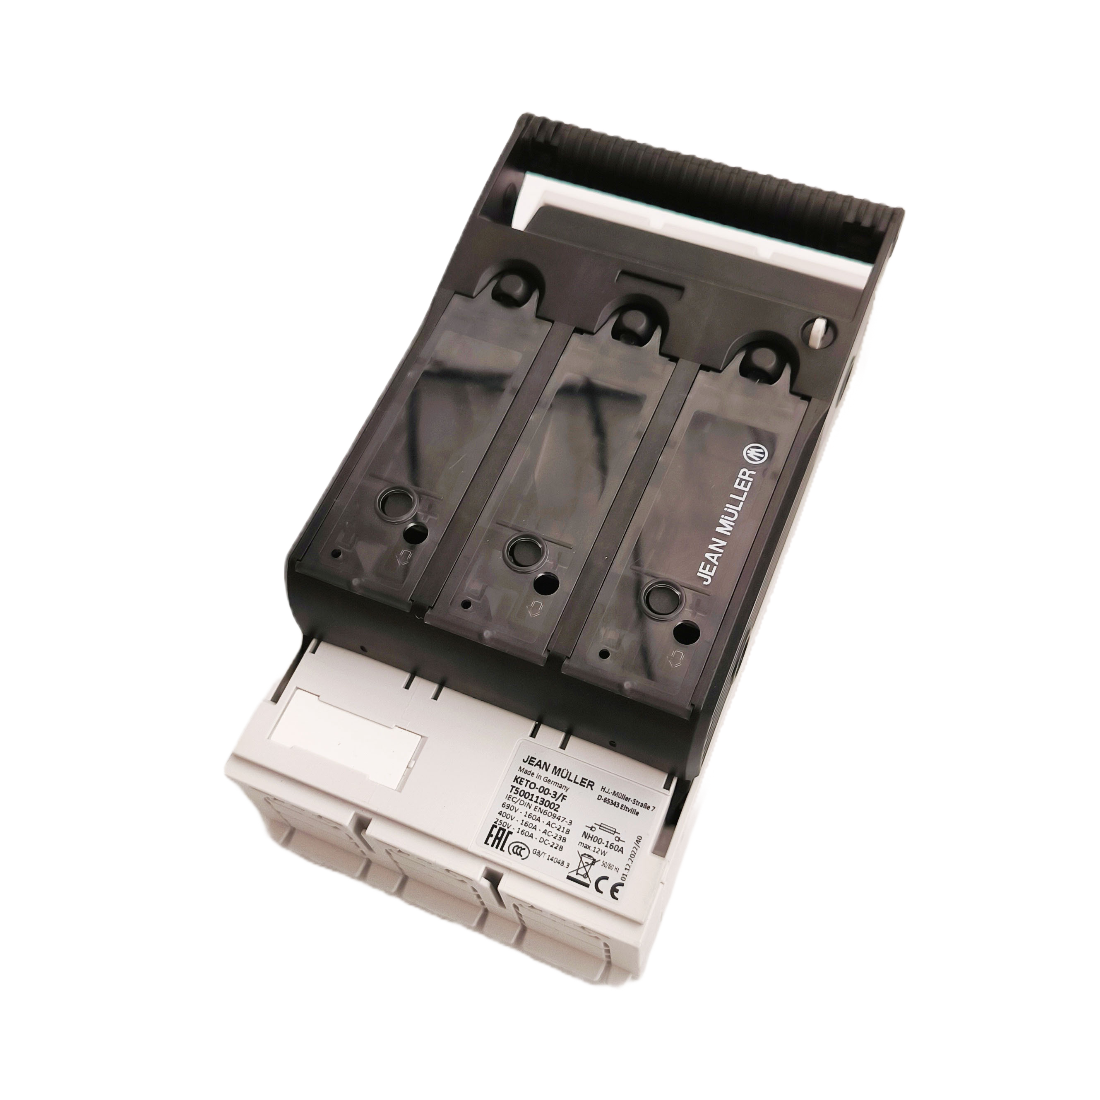 Jean Muller KETO-00 Battery Disconnector with 80A Fuses